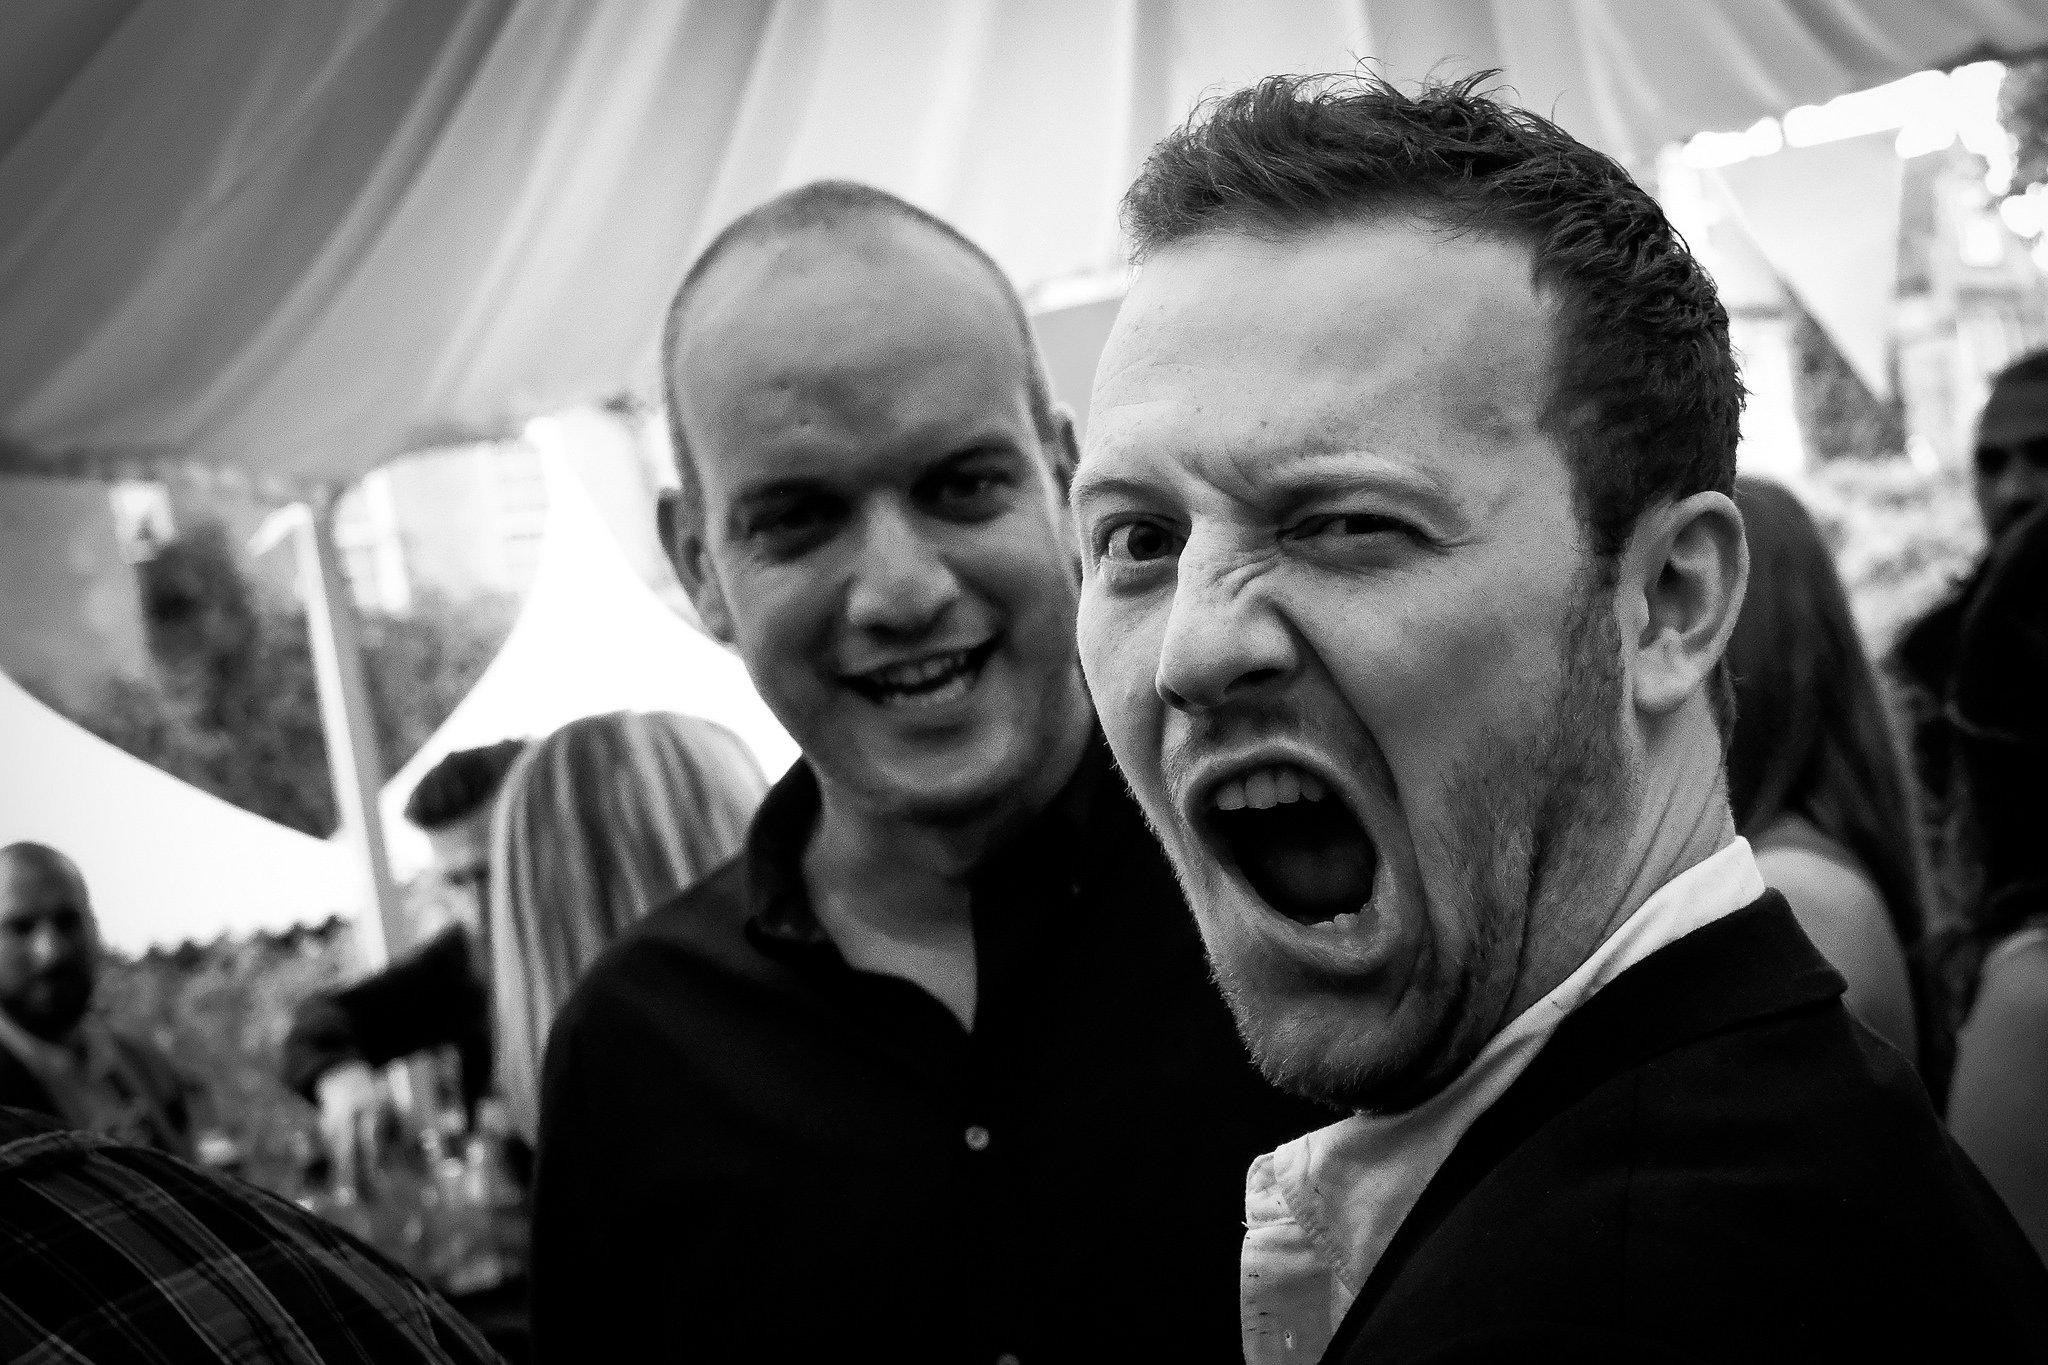 The Hut Group Summer Party 2016 - Pulling faces